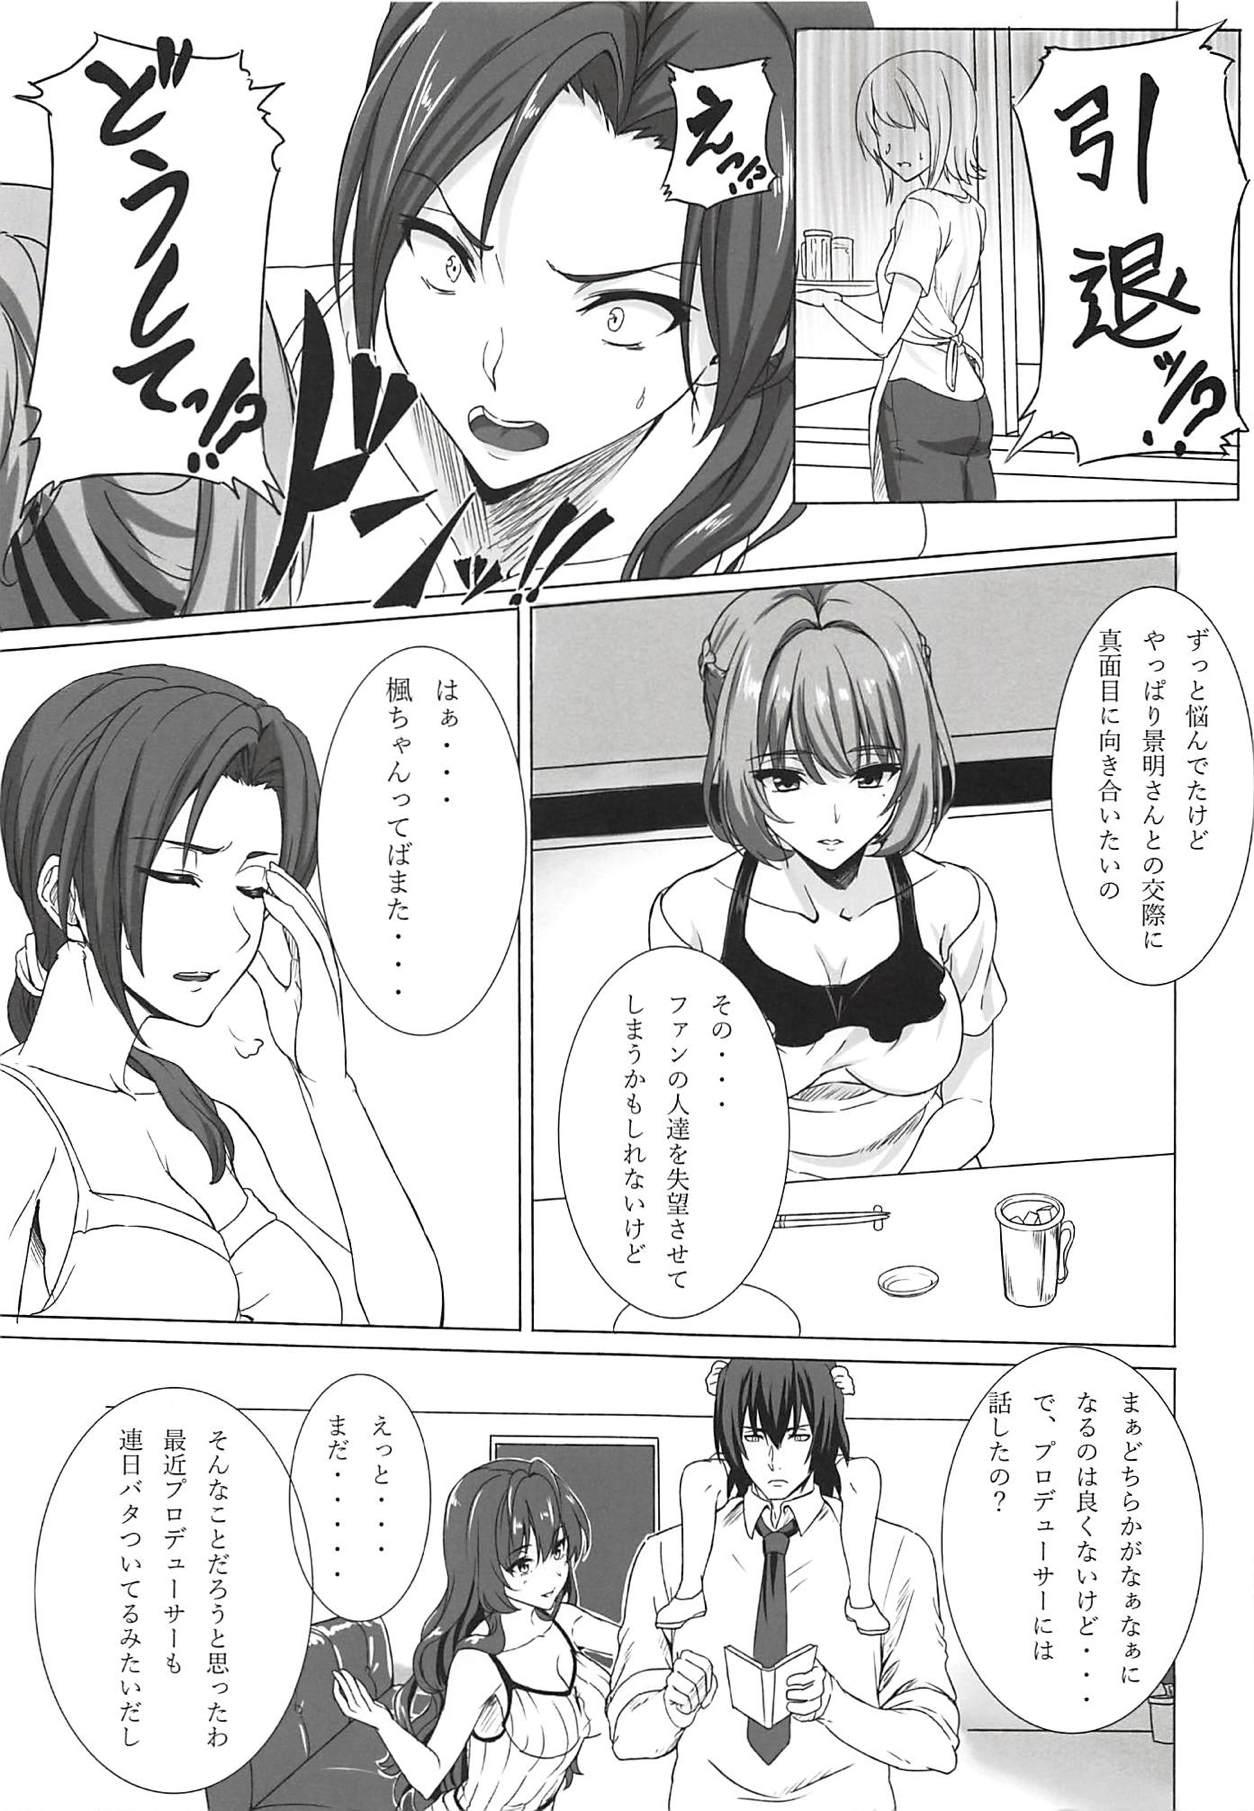 Small Tits Koikaze Project IV - The idolmaster Chile - Page 2